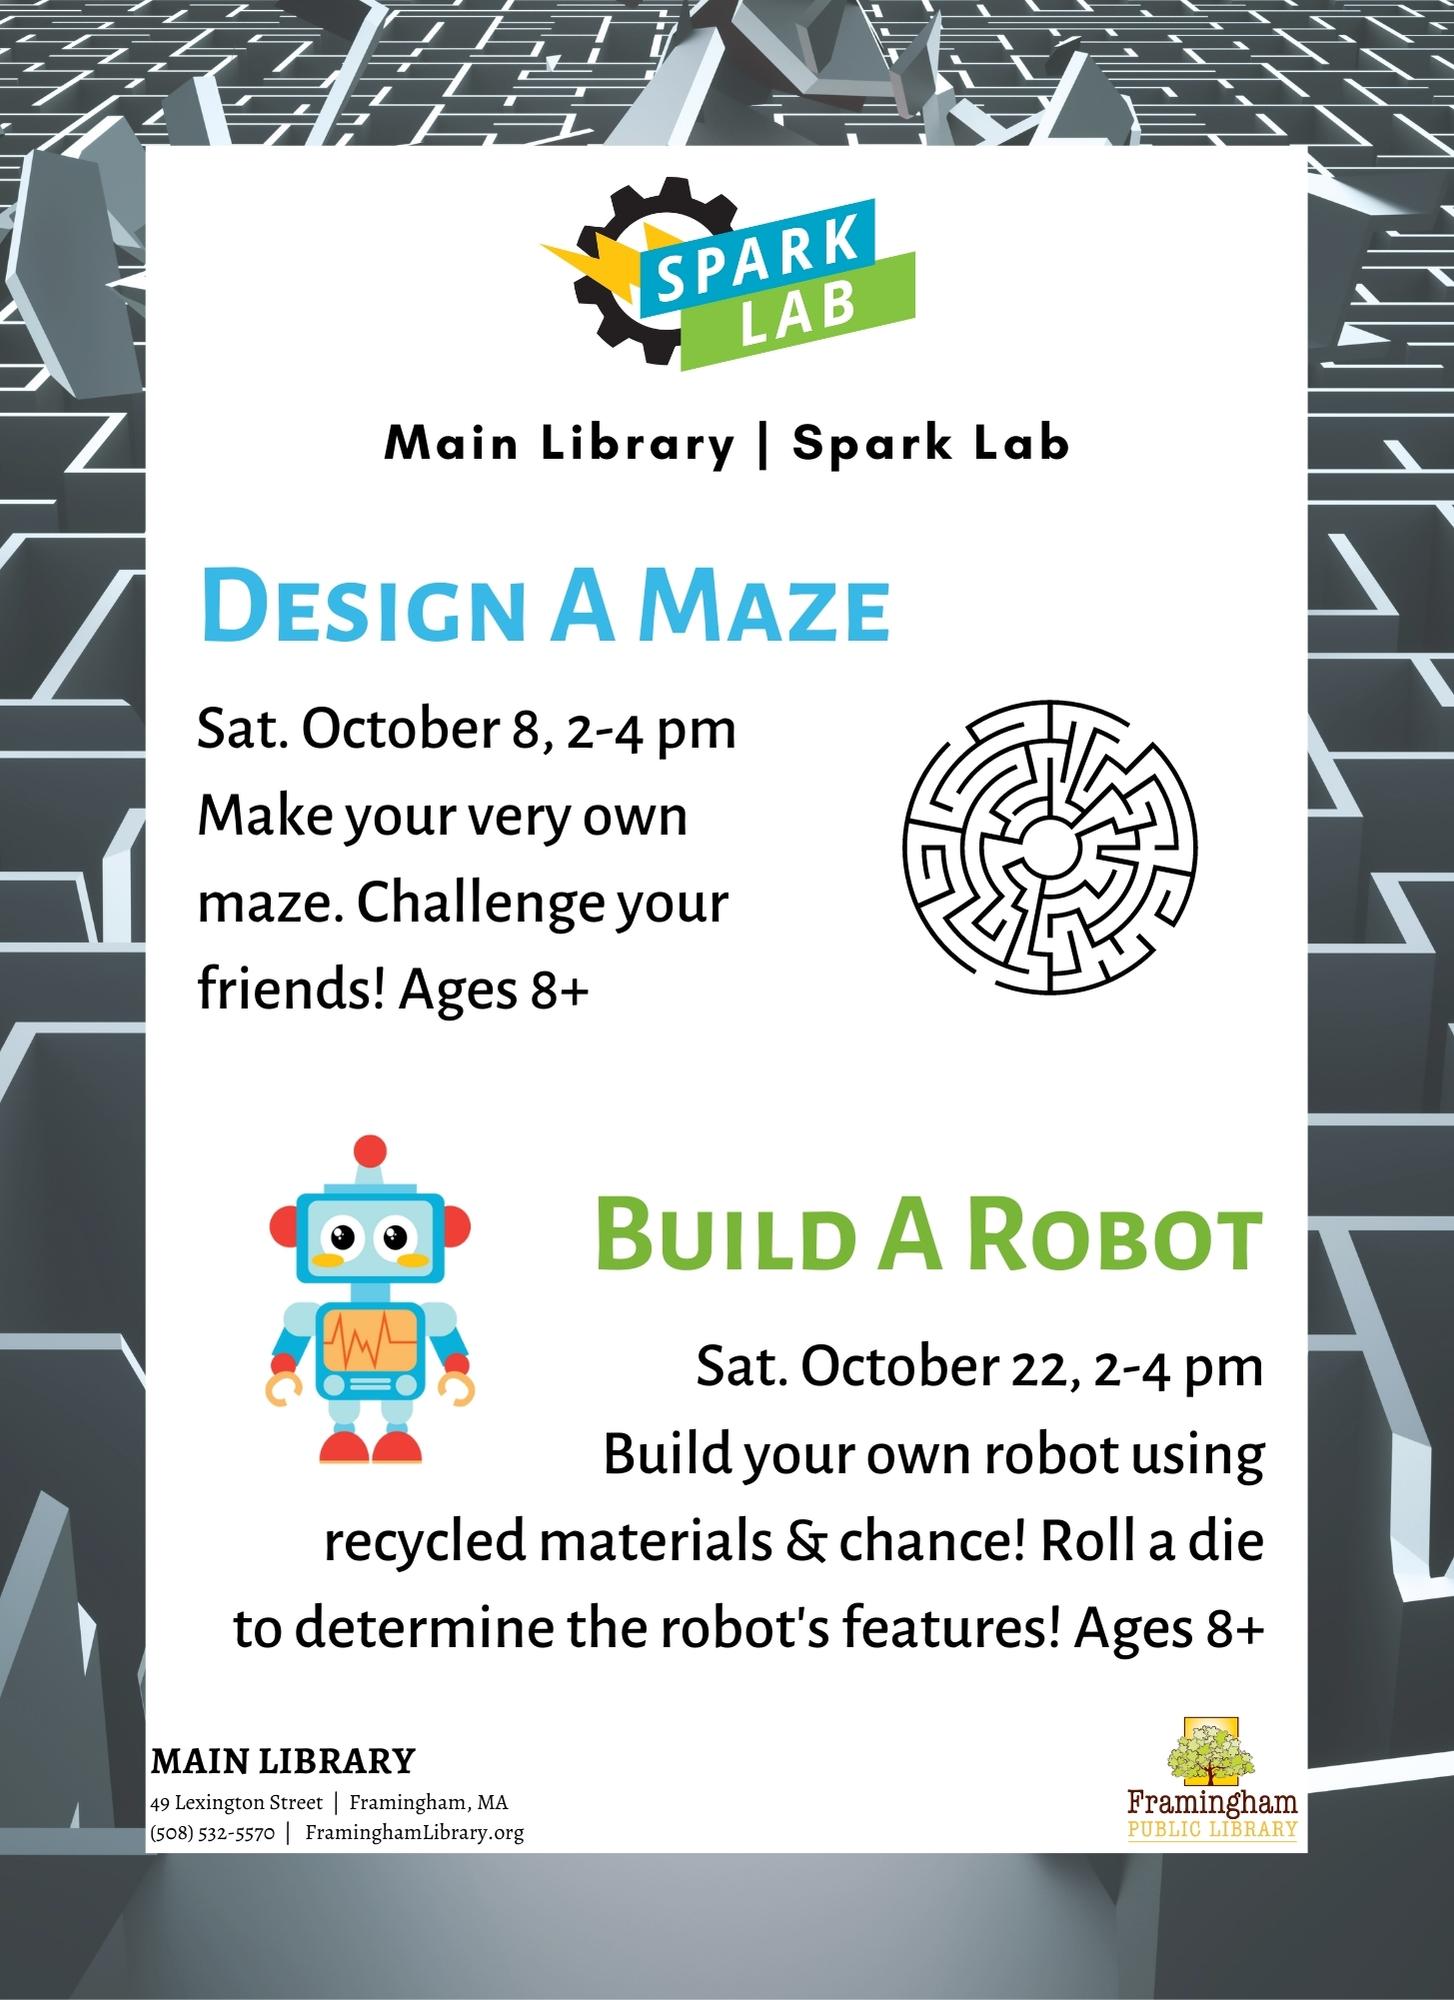  Design a Maze October 08, 2022 , 2:00 pm - 4:00 pm / Main Library | Spark Lab Make your very own maze. Challenge your friends!